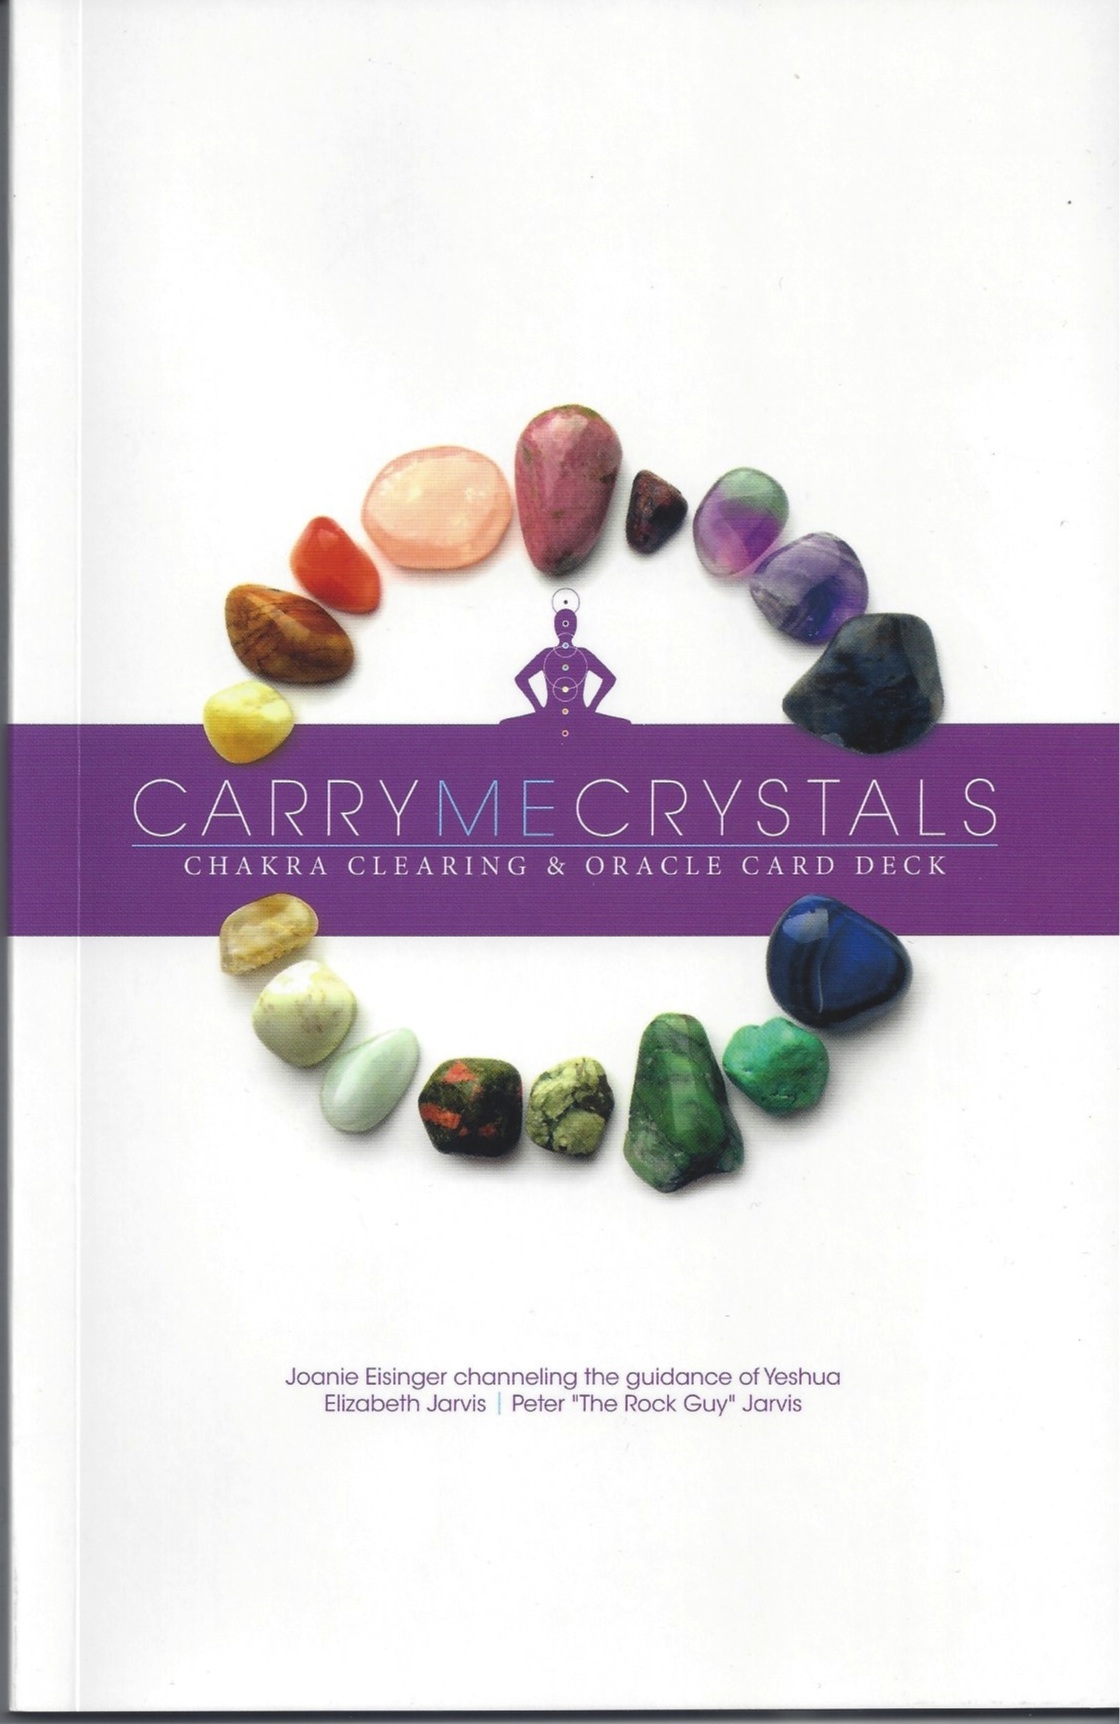 Carry me Crystals box with gemstone oracle cards